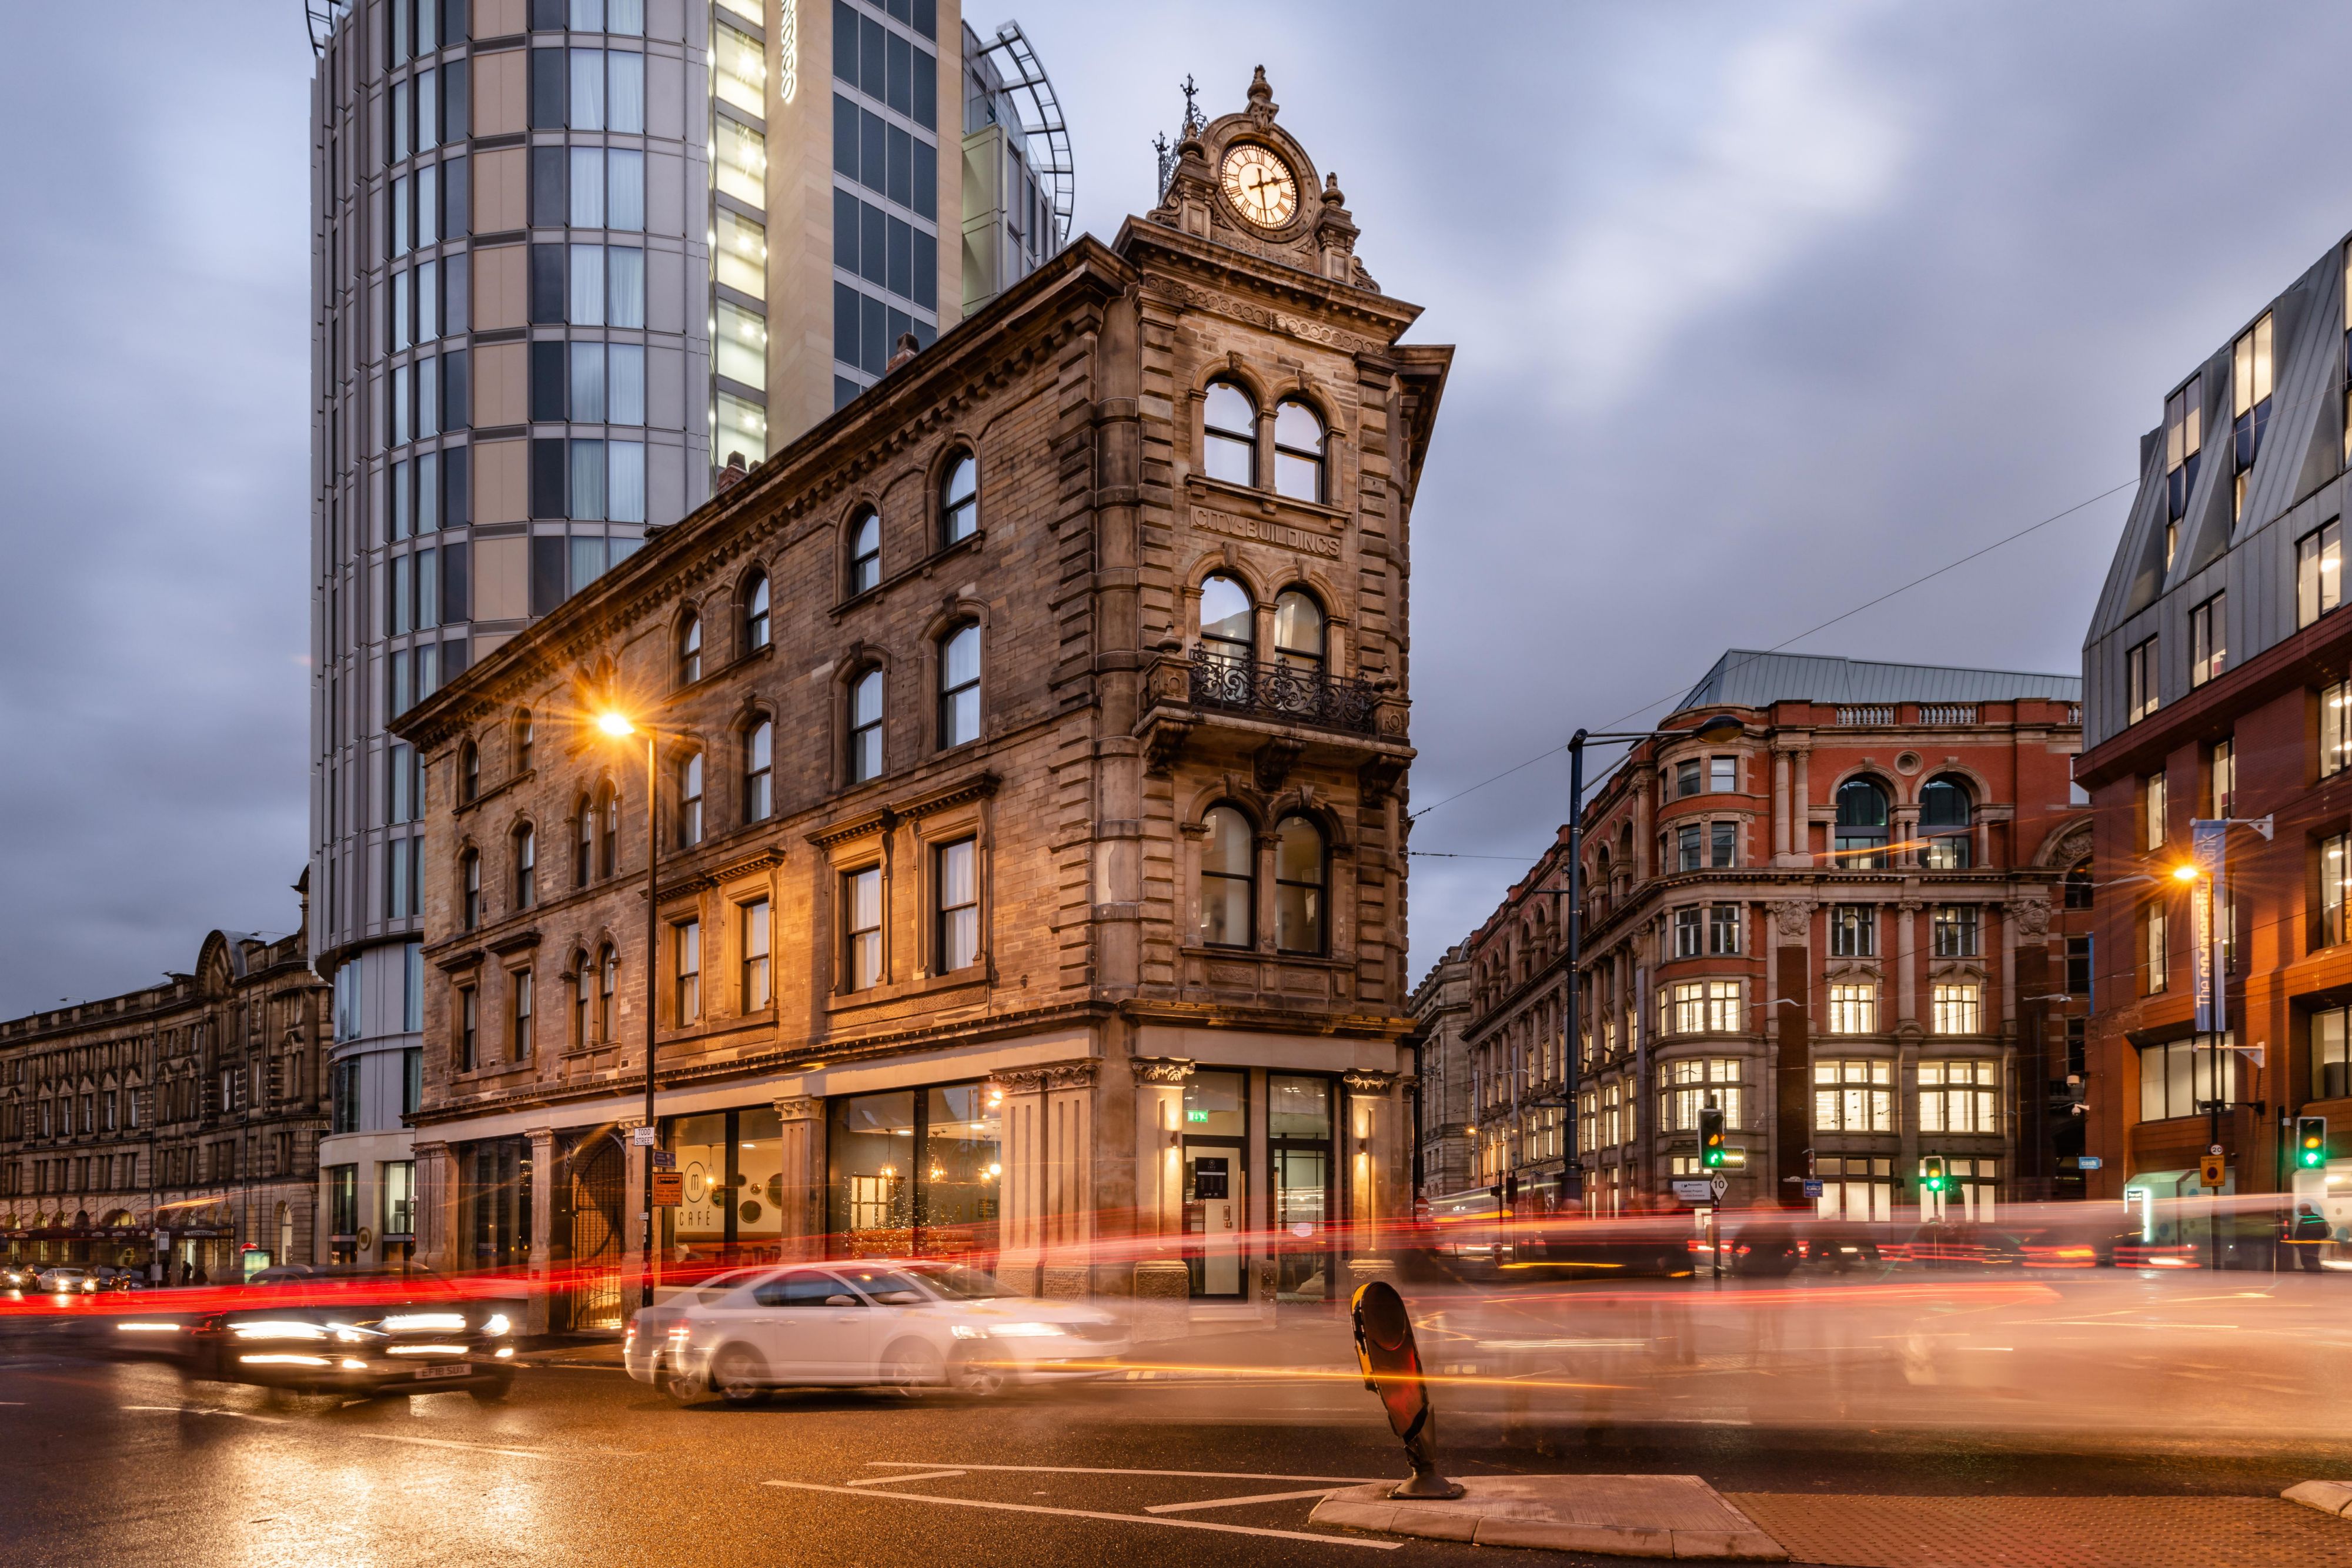 Sat in Manchester's bustling and diverse city centre and conveniently adjacent to Manchester Victoria train station. Local attractions just minutes away include the Northen Quarter, AO Arena, Printworks Manchester and many more. 